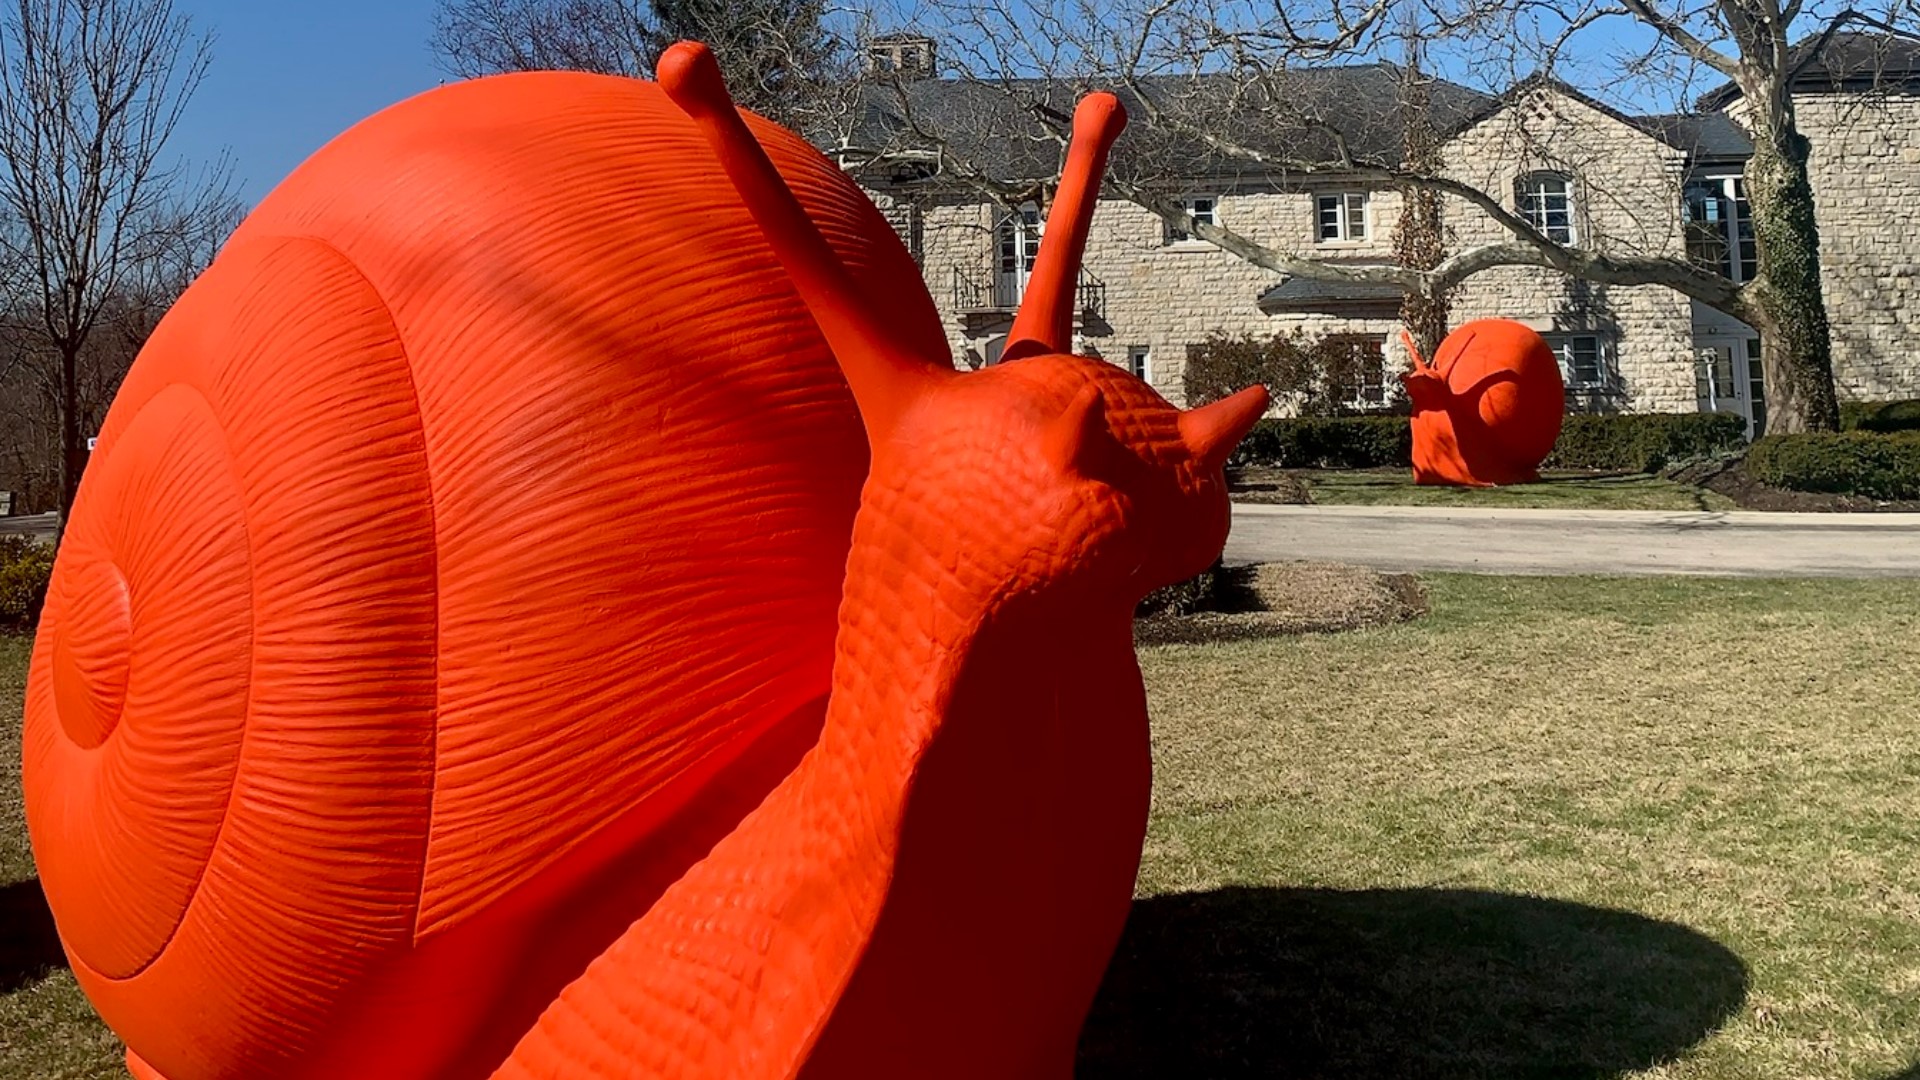 Those interested in seeing the giant snails can visit them on the front lawn of the Dublin Arts Council at 7125 Riverside Dr. in Dublin.